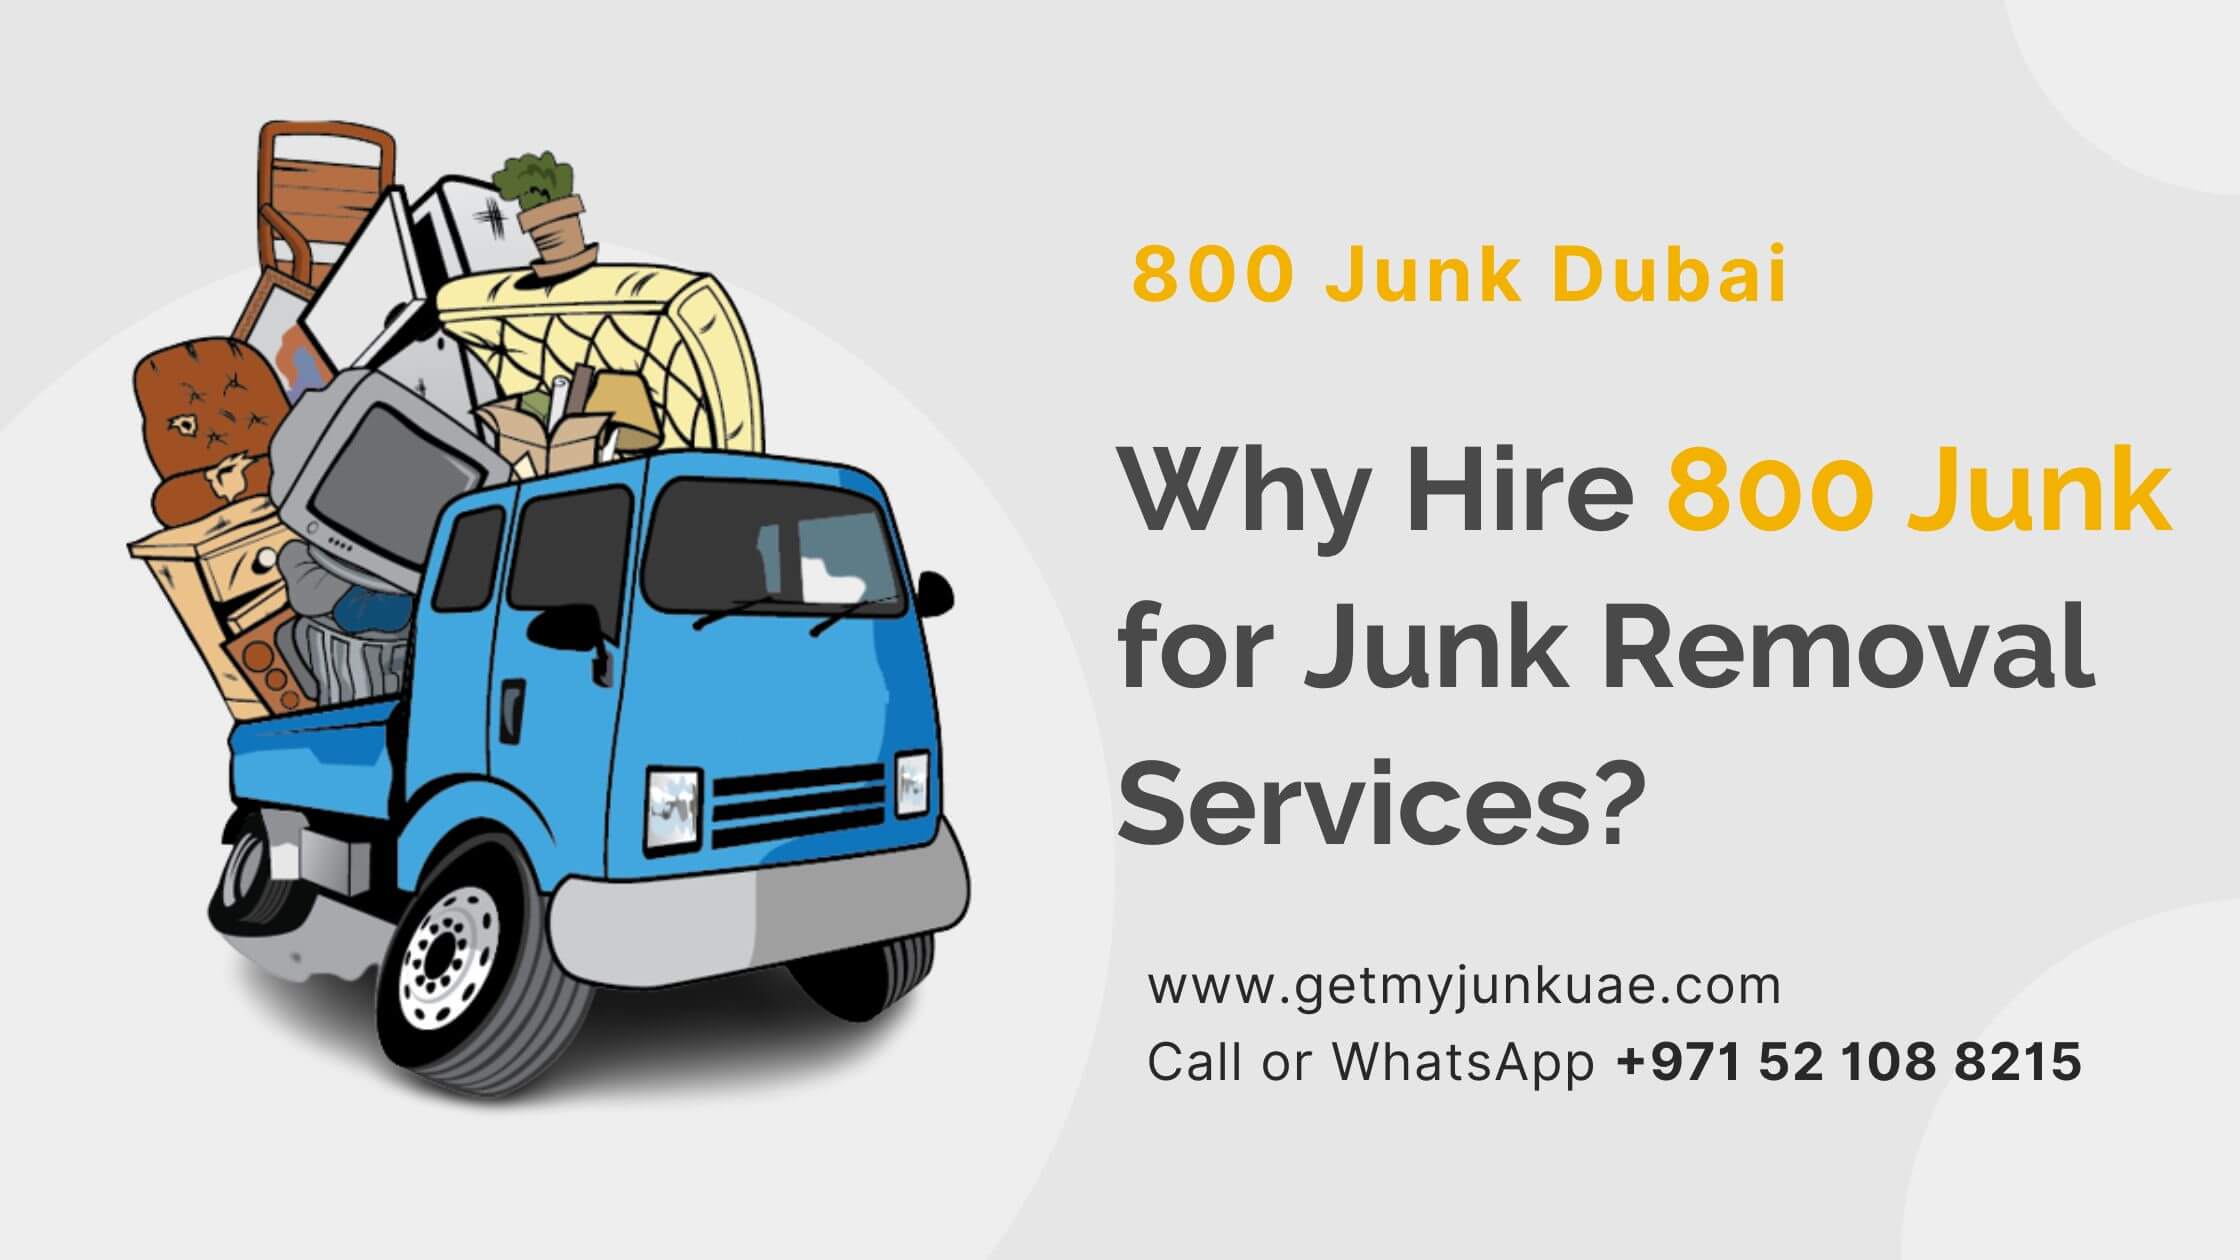 Why Hire 800 Junk Dubai for Junk Removal Services? Get My Junk UAE